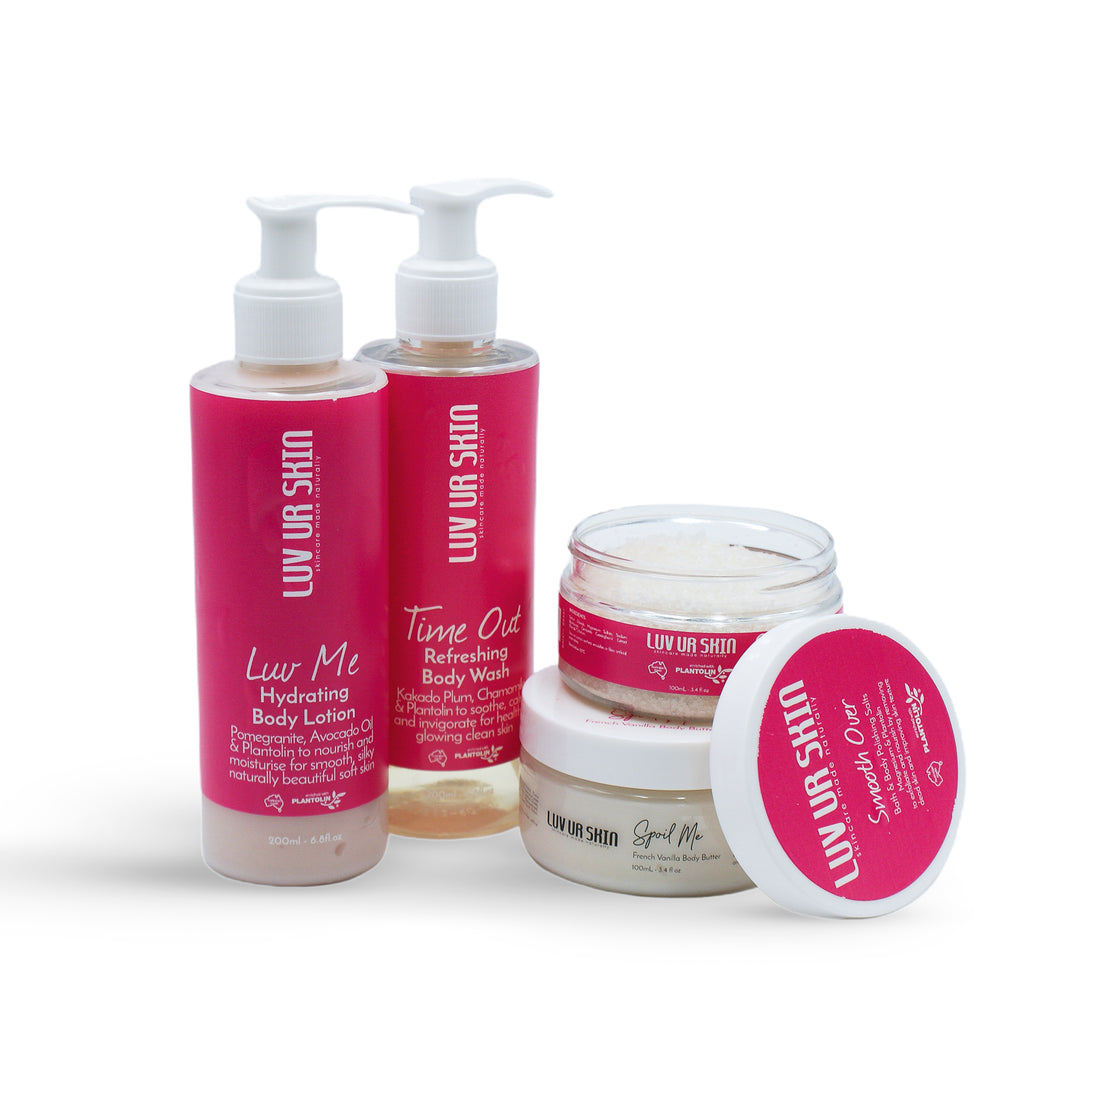 Compete Body Pamper Pack